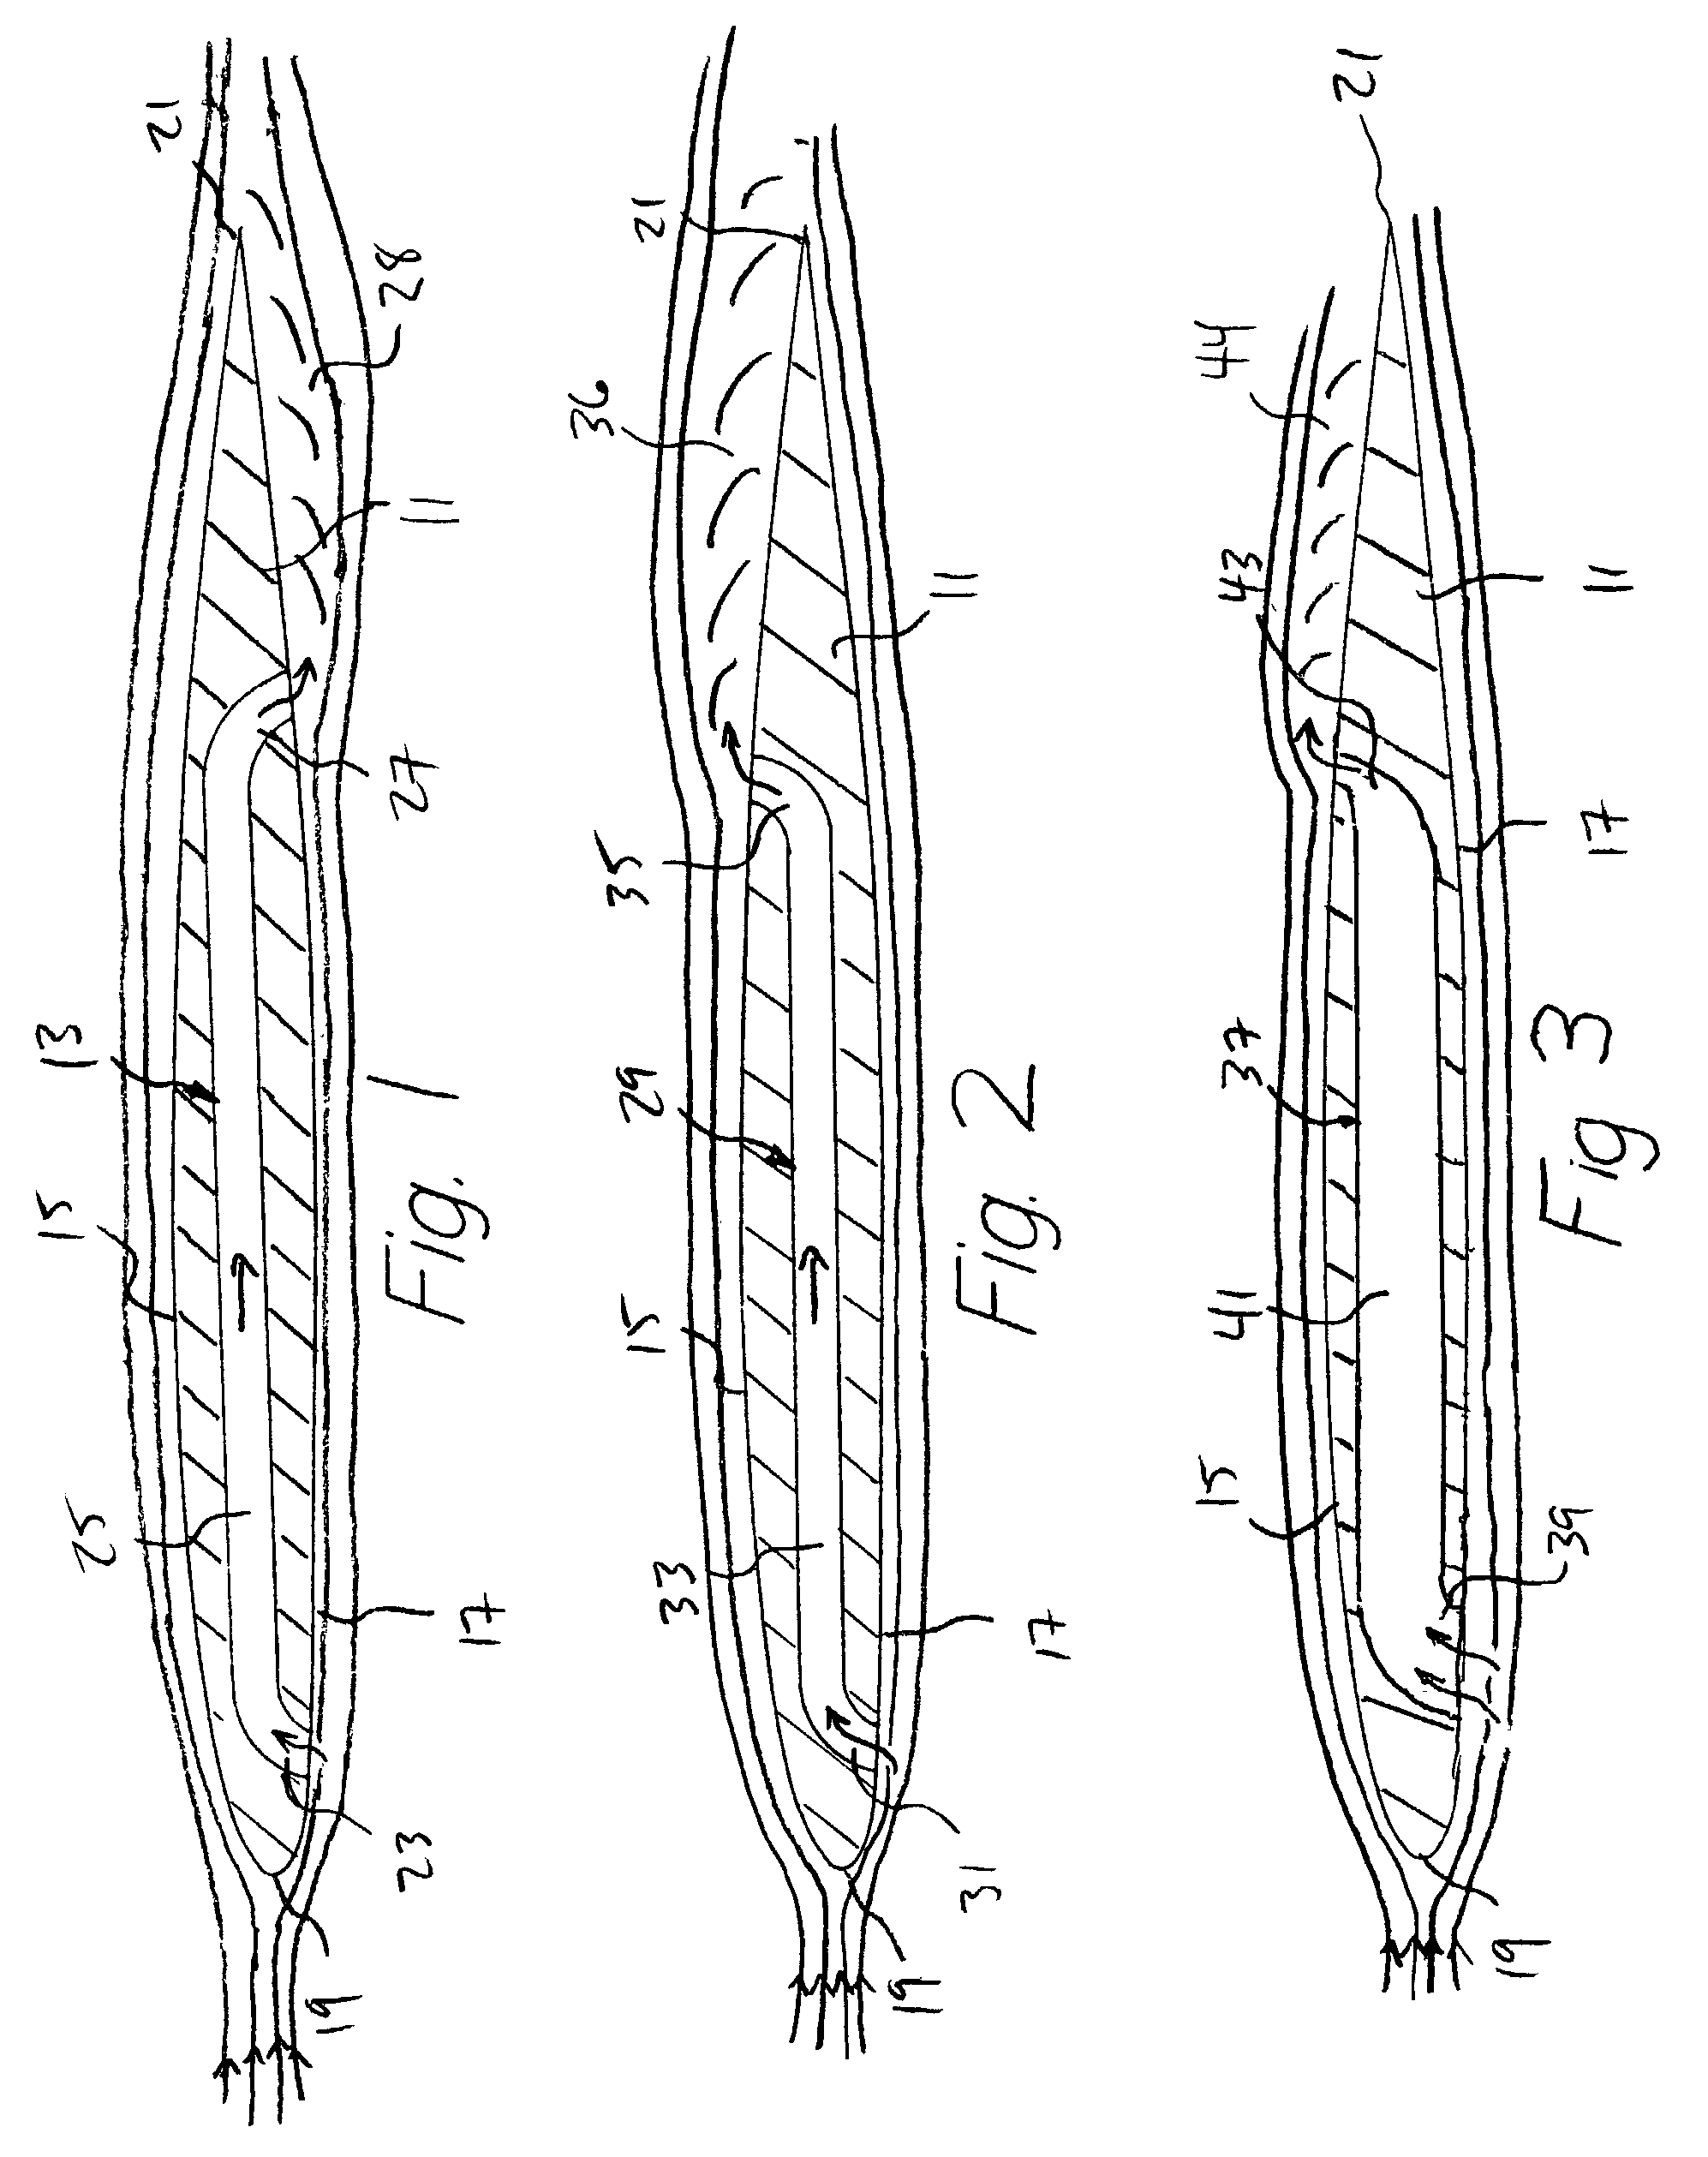 Passive jet spoiler for yaw control of an aircraft